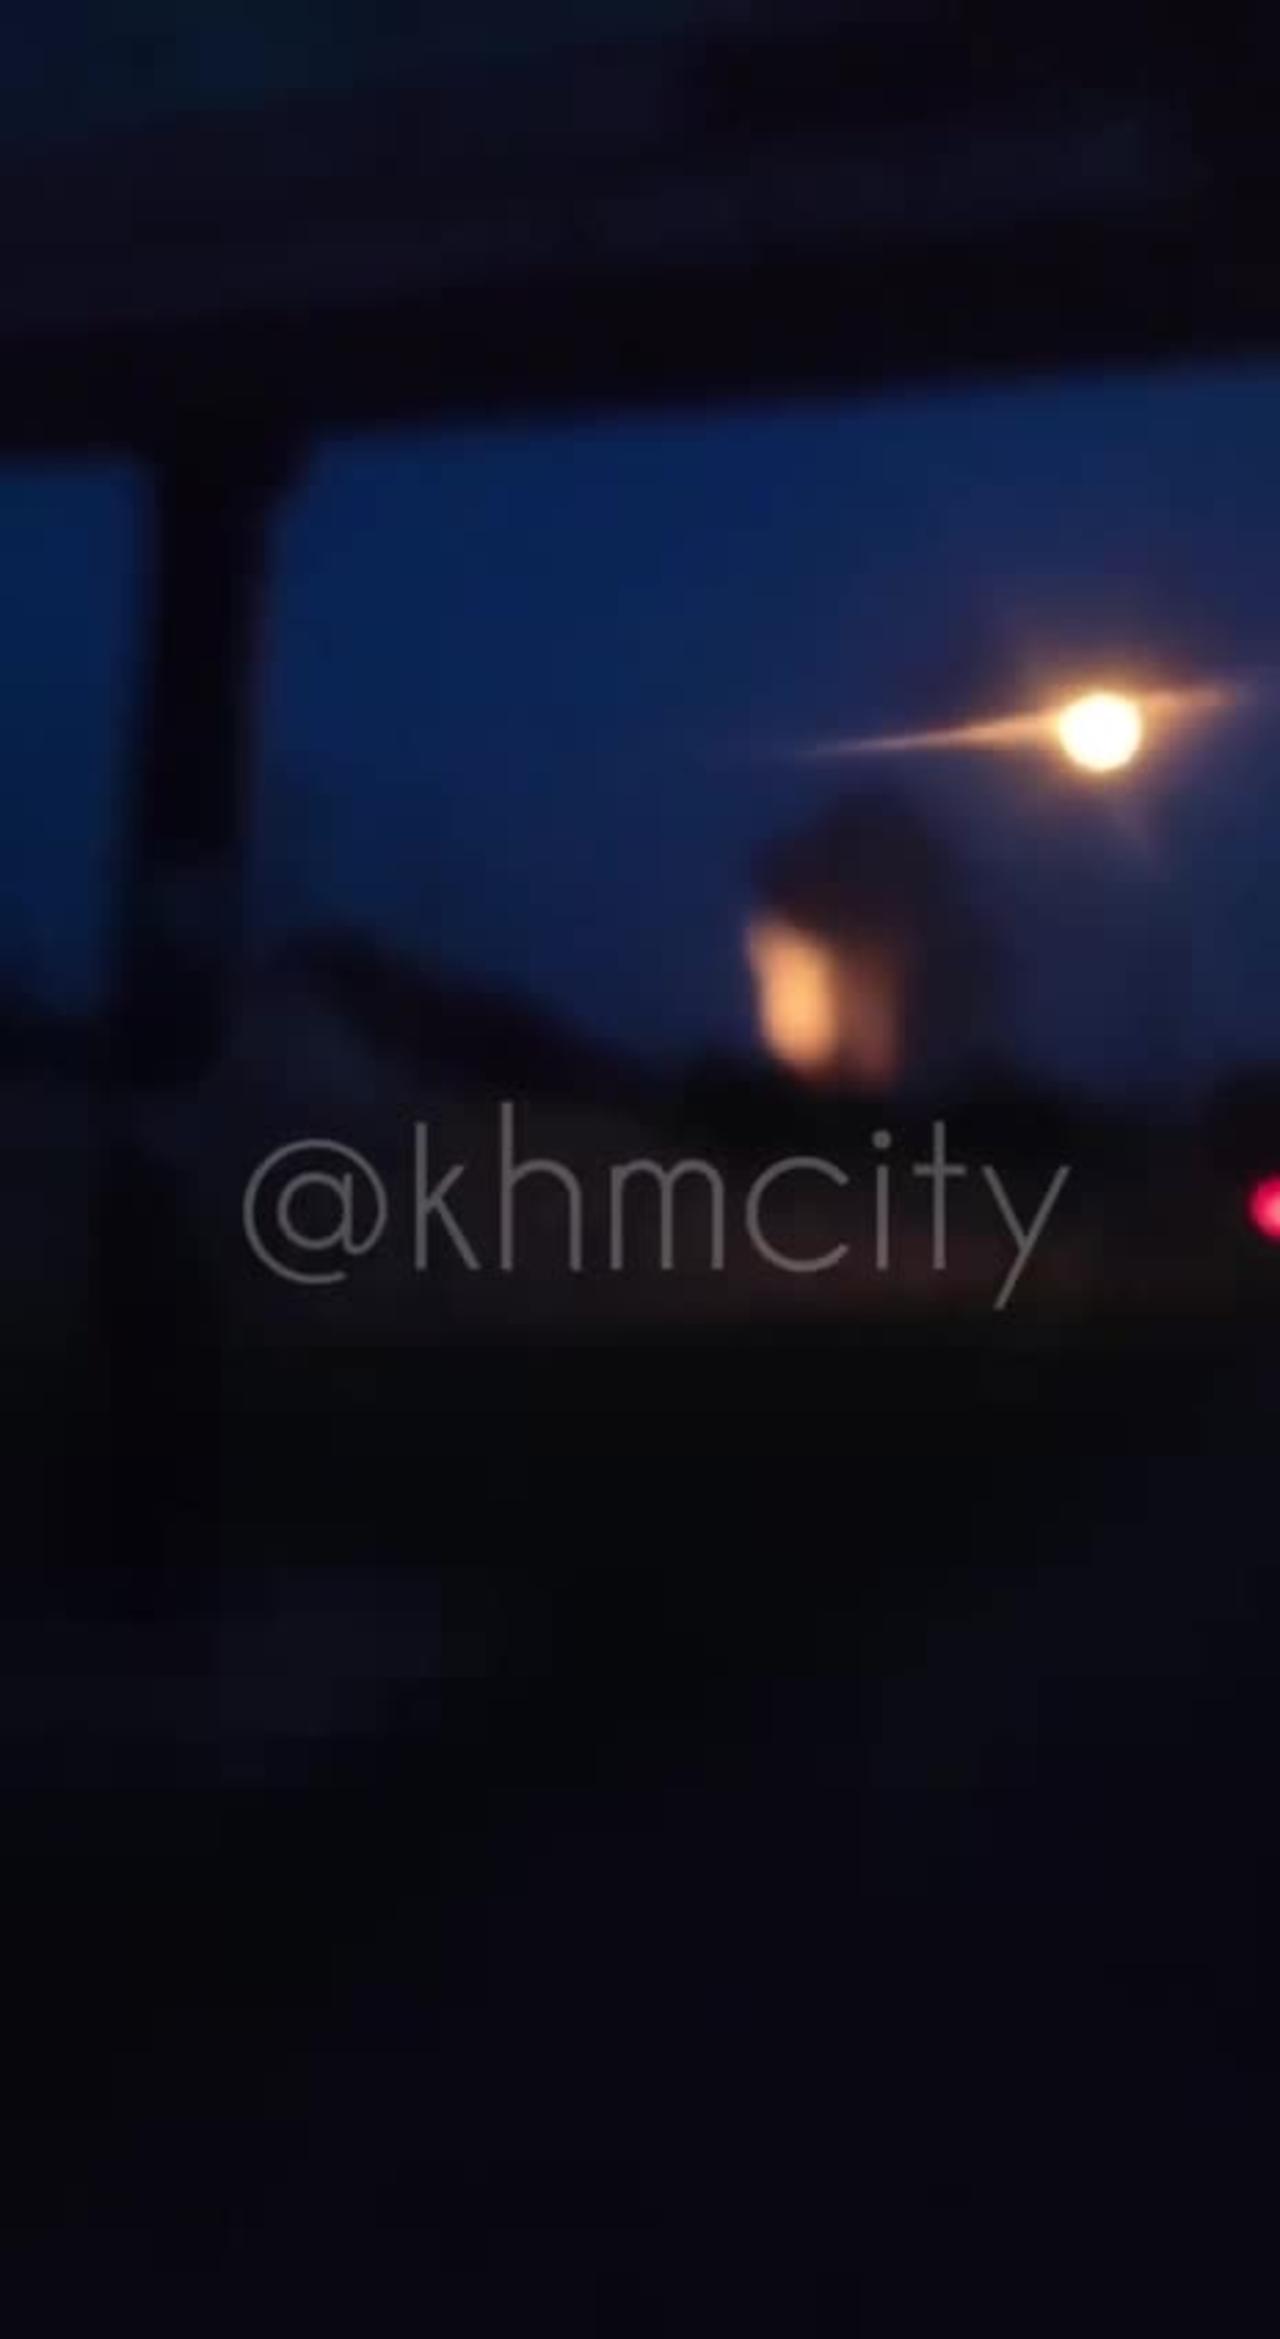 massive Russian missile attack in the Khmelnytsky region